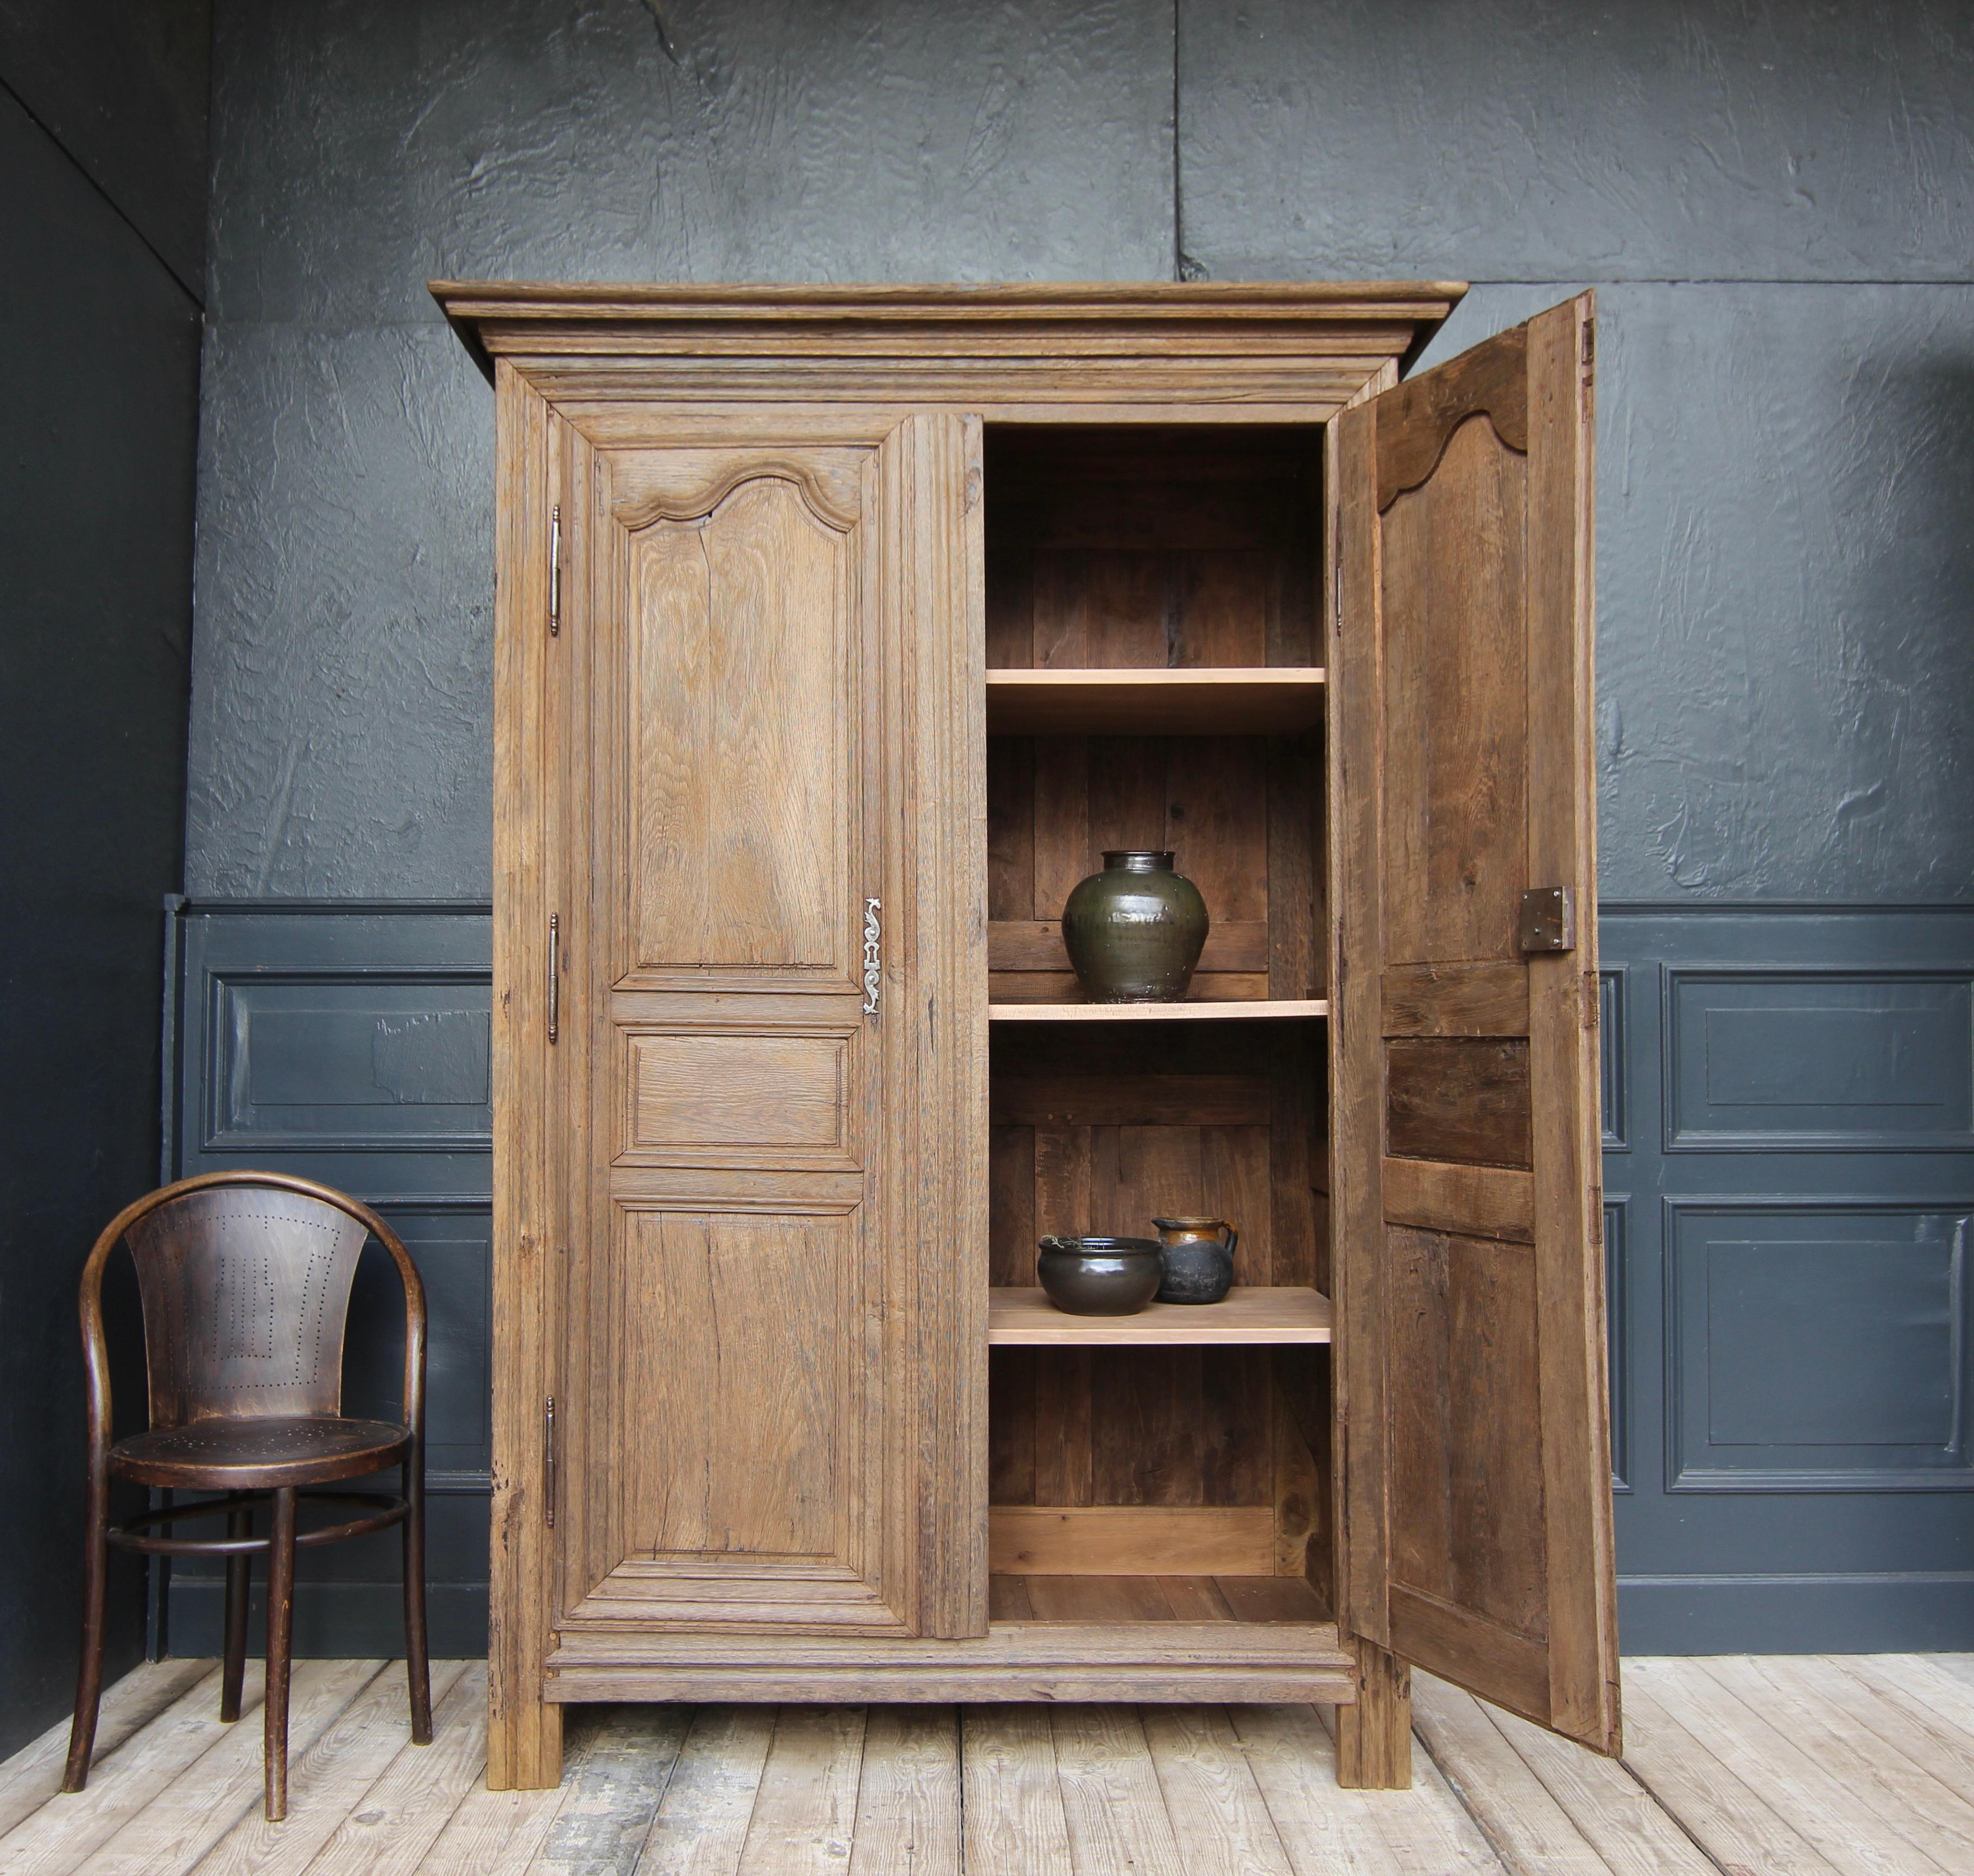 A early 19th century french provincial cabinet or wedding cabinet made of solid oak. 

An authentic piece of furniture whose particular appeal lies in the combination of clear classic design and the charming texture of the old oak wood surface.

